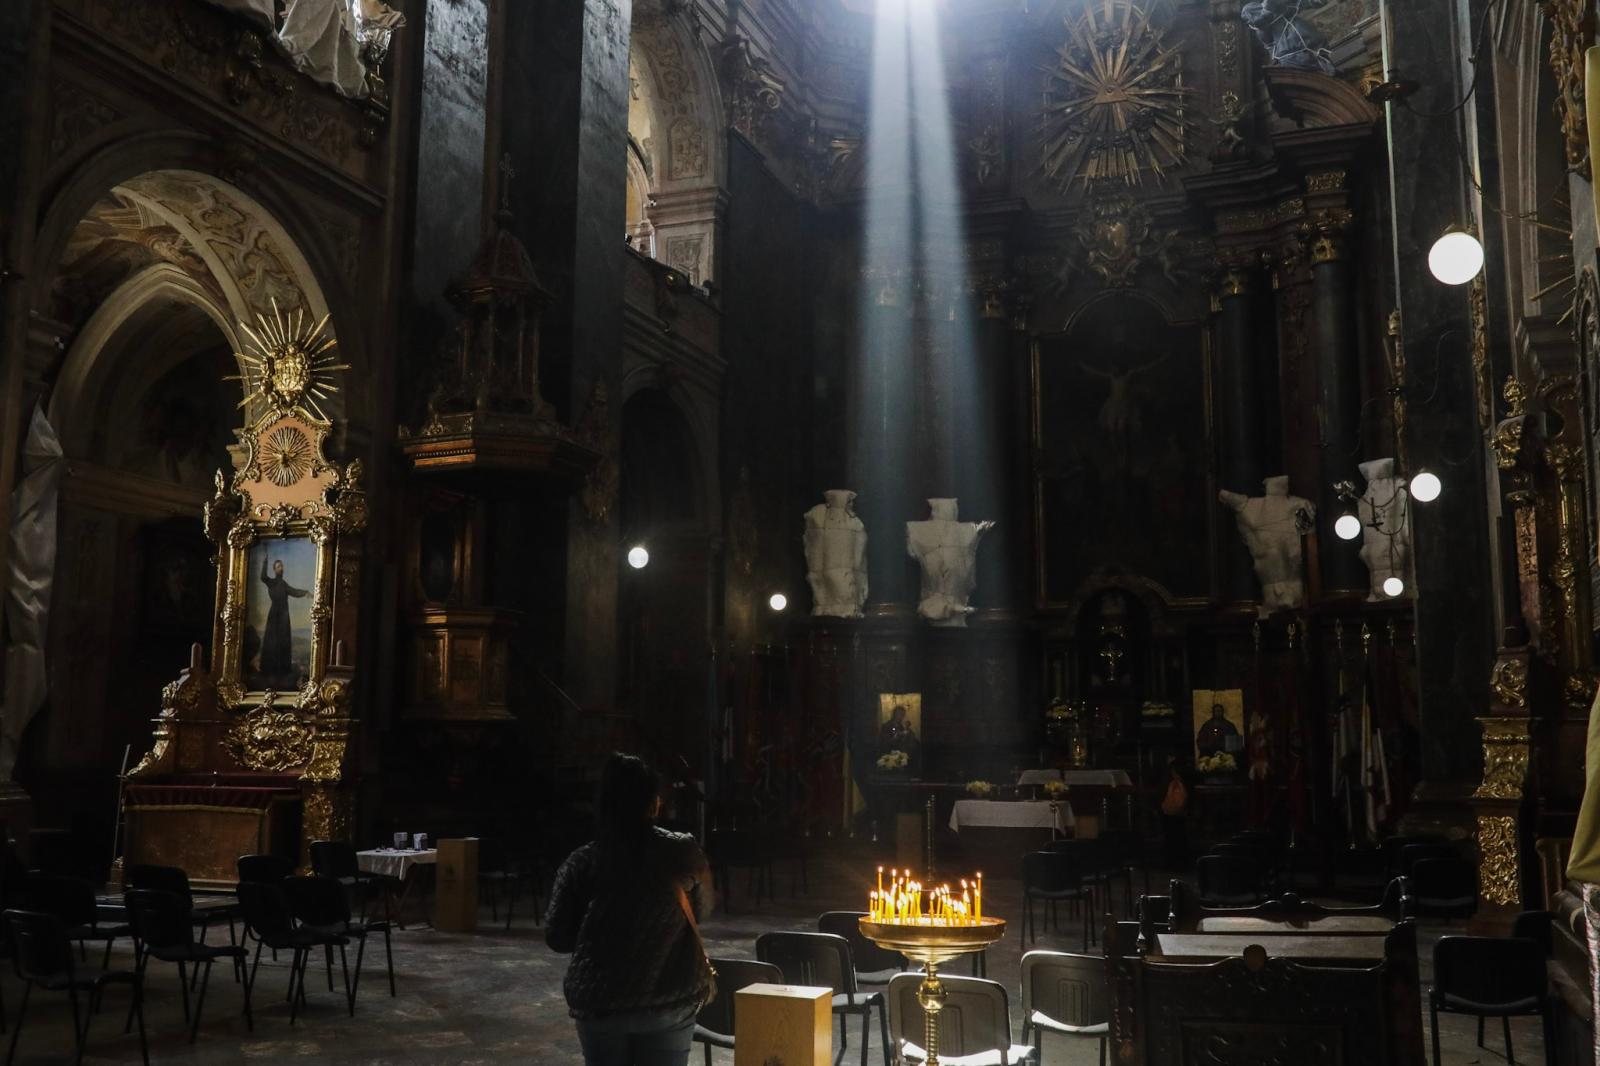 Anadolu/Getty - Easter gathering at Saints Peter and Paul Church in Lviv amid Russian attacks -   